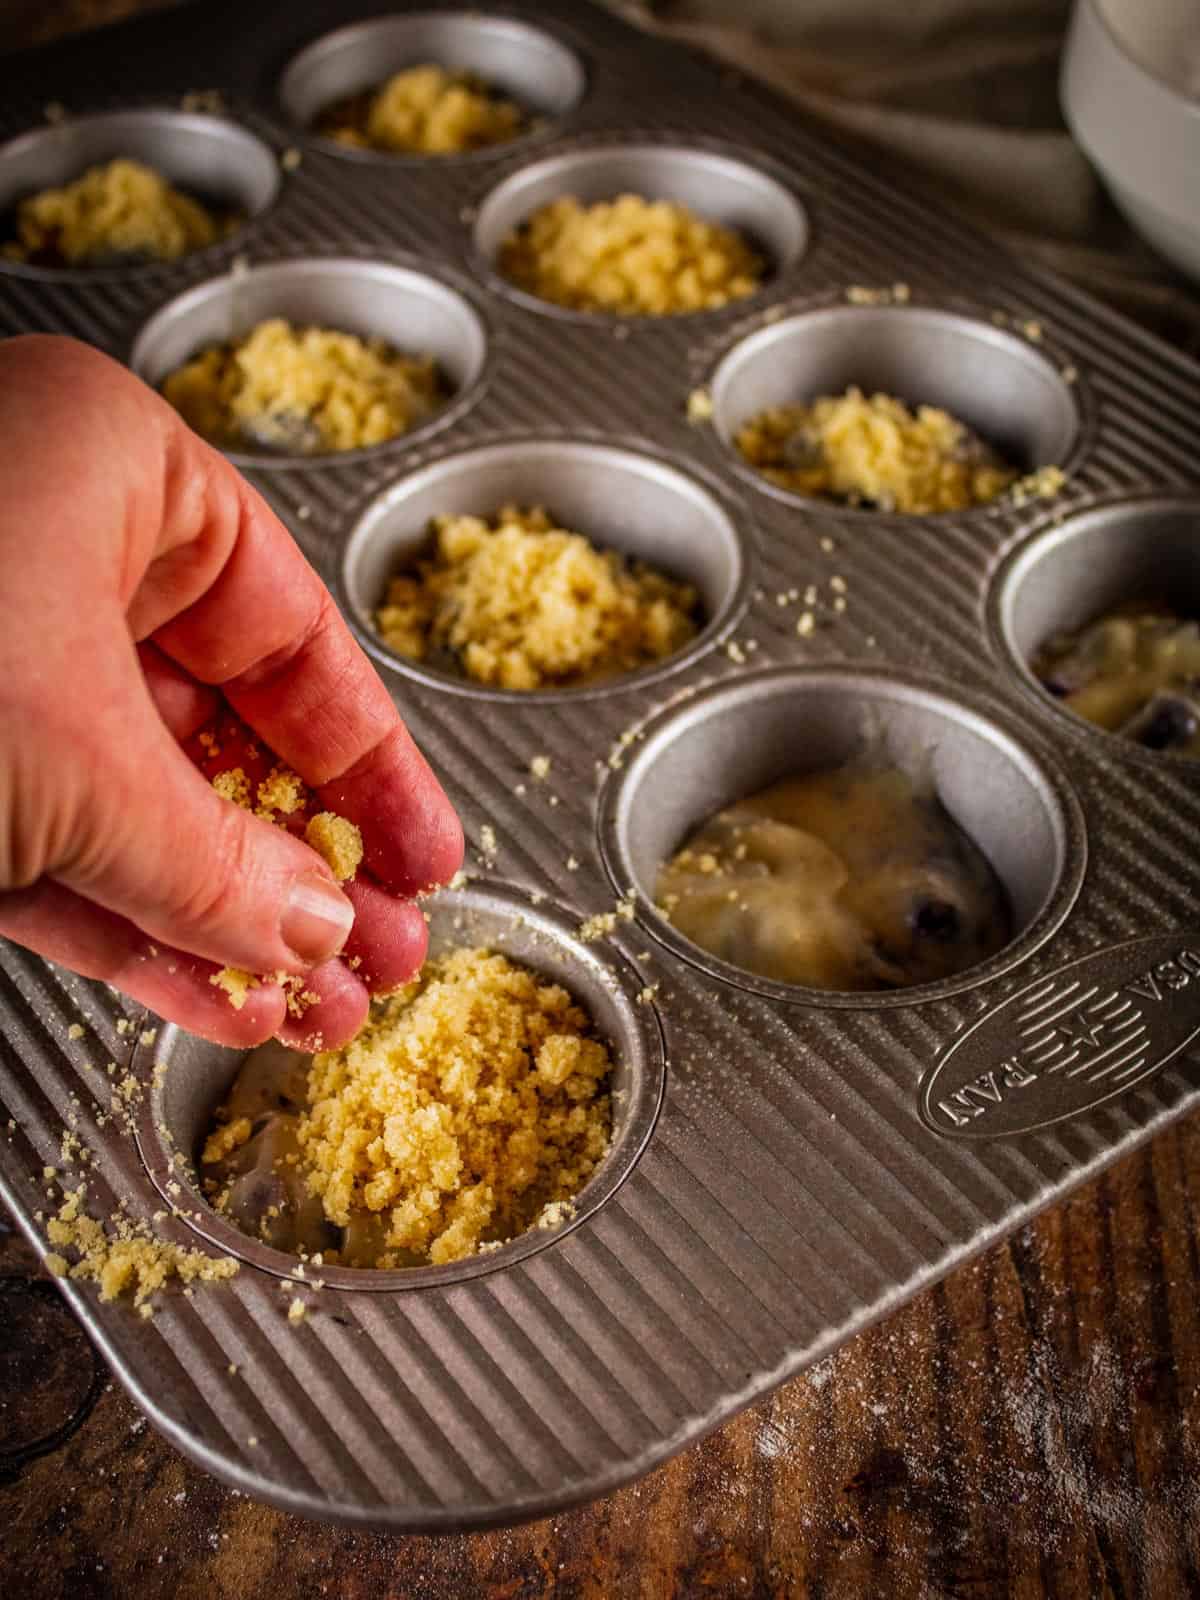 hand sprinkling streusel topping on muffin batter